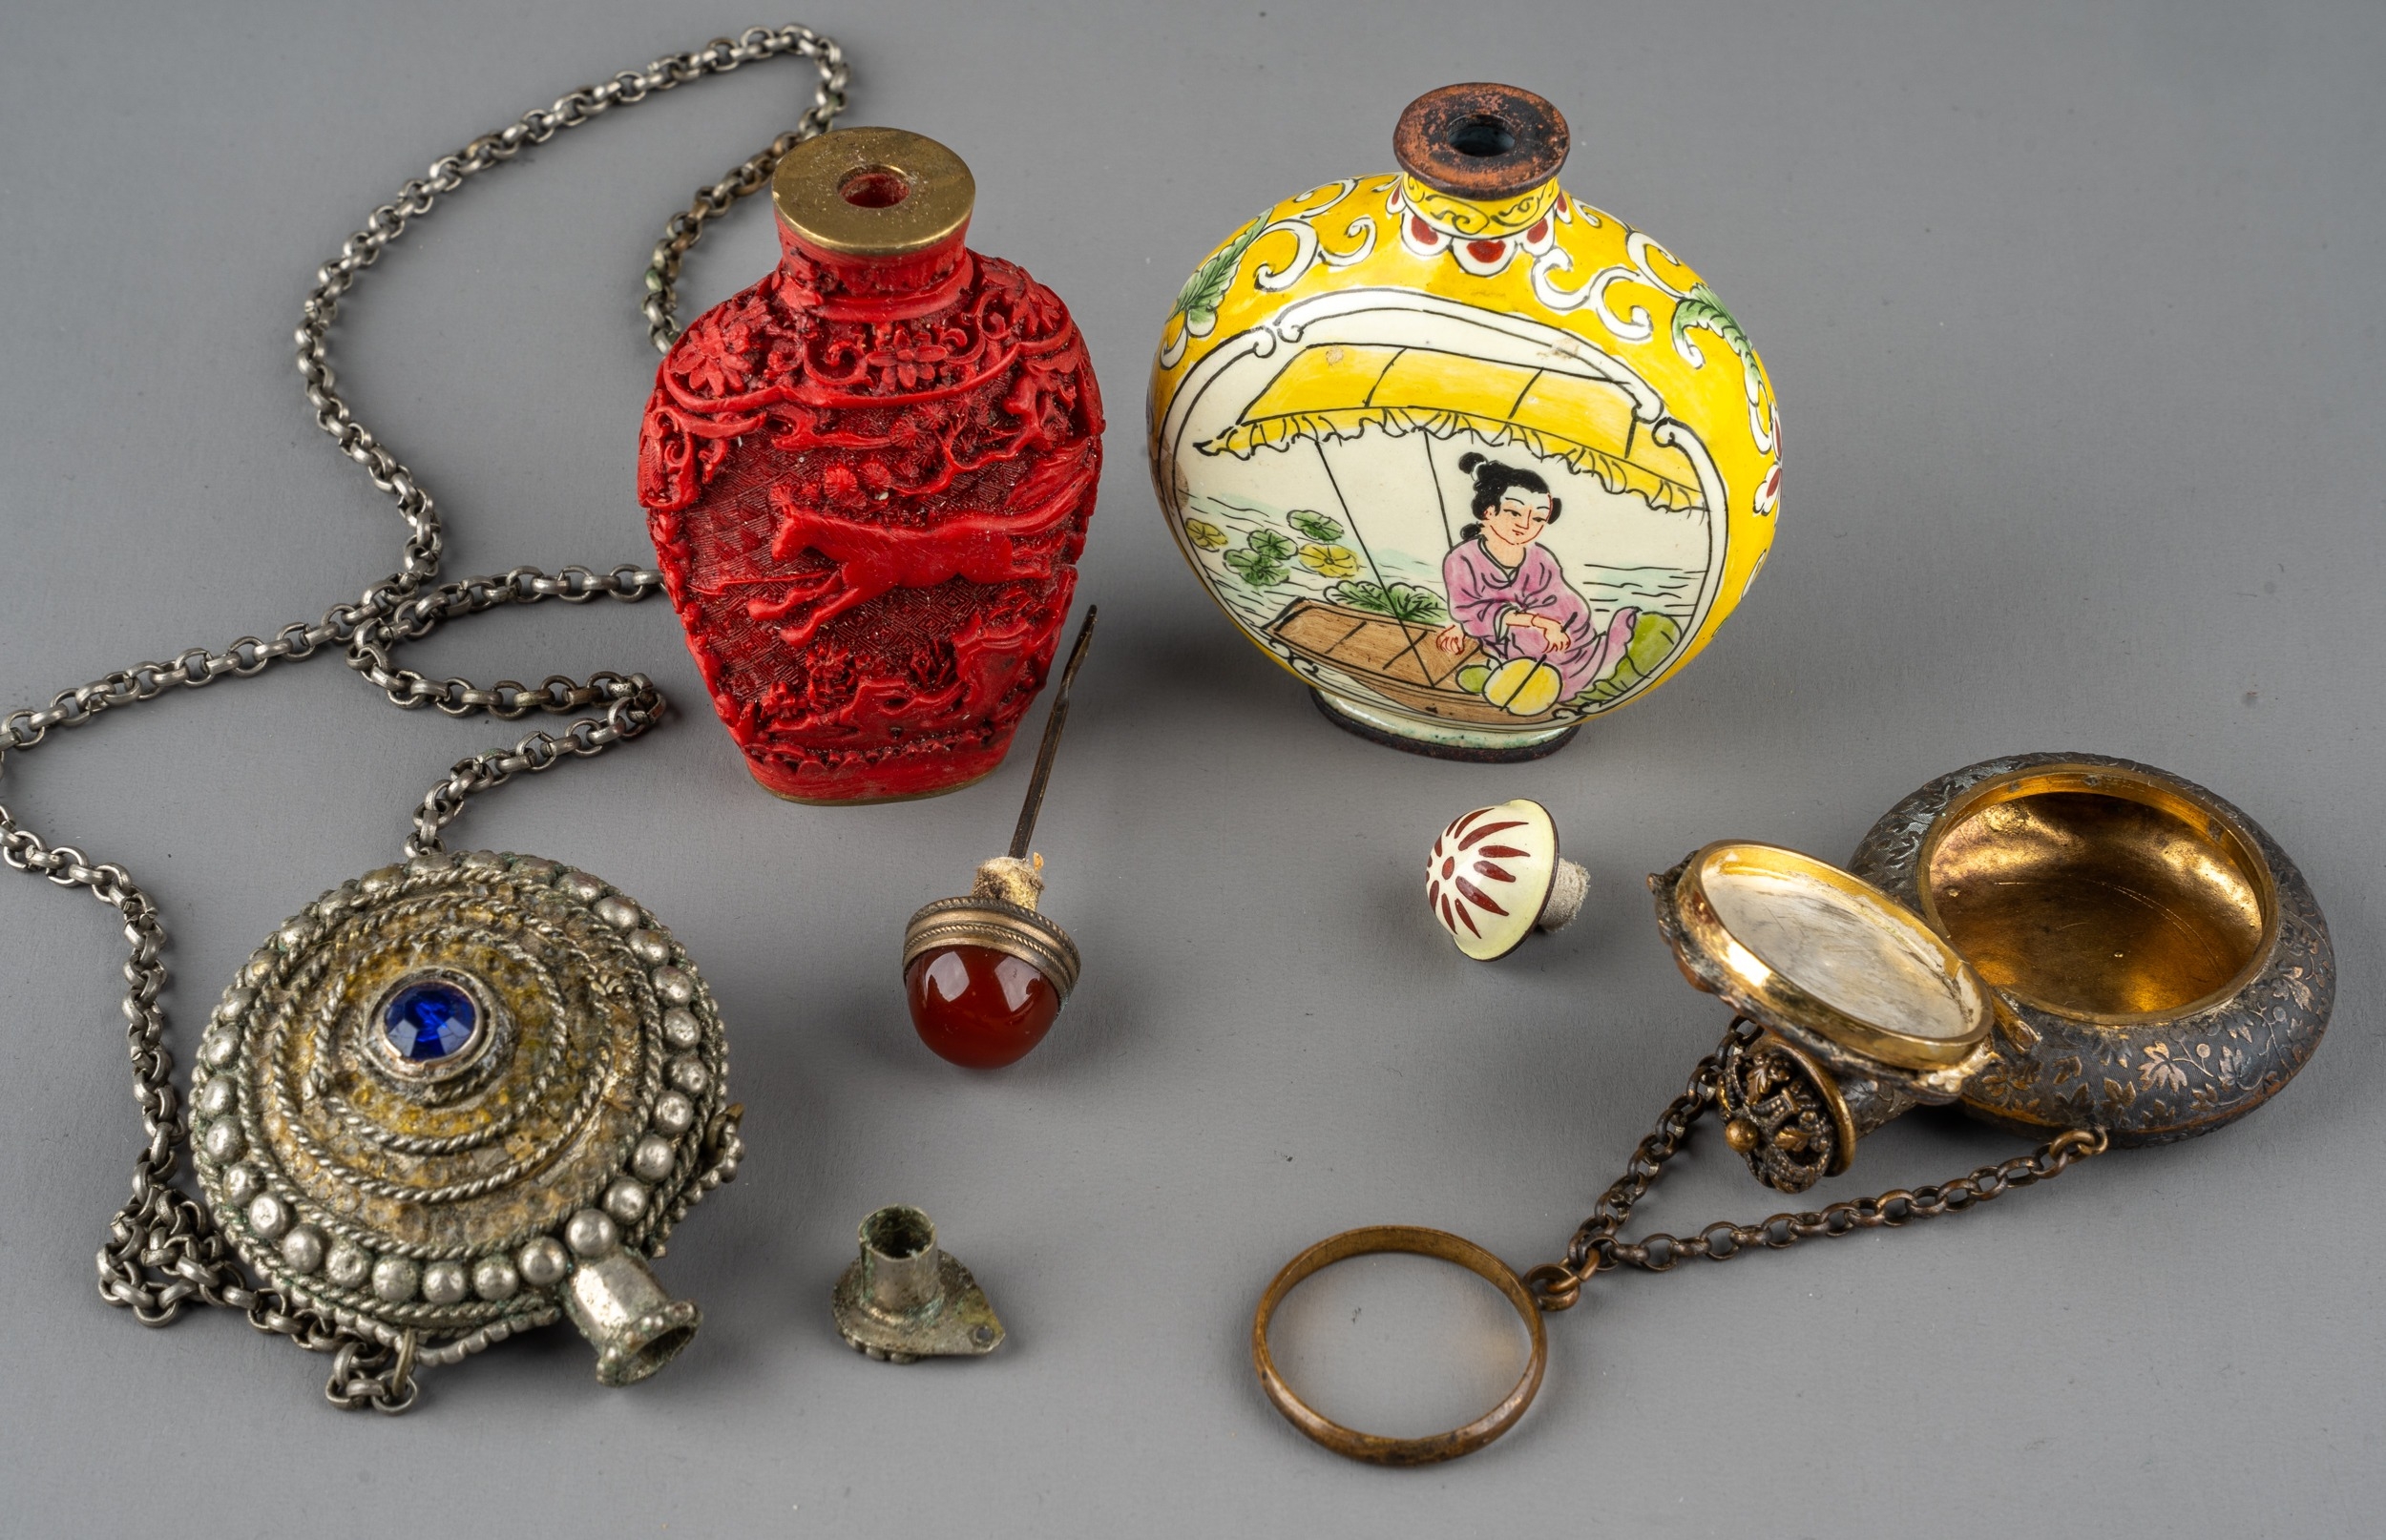 A collection of Chinese snuff bottles, including an ovoid cinnabar bottle depicting horses amongst - Image 3 of 4